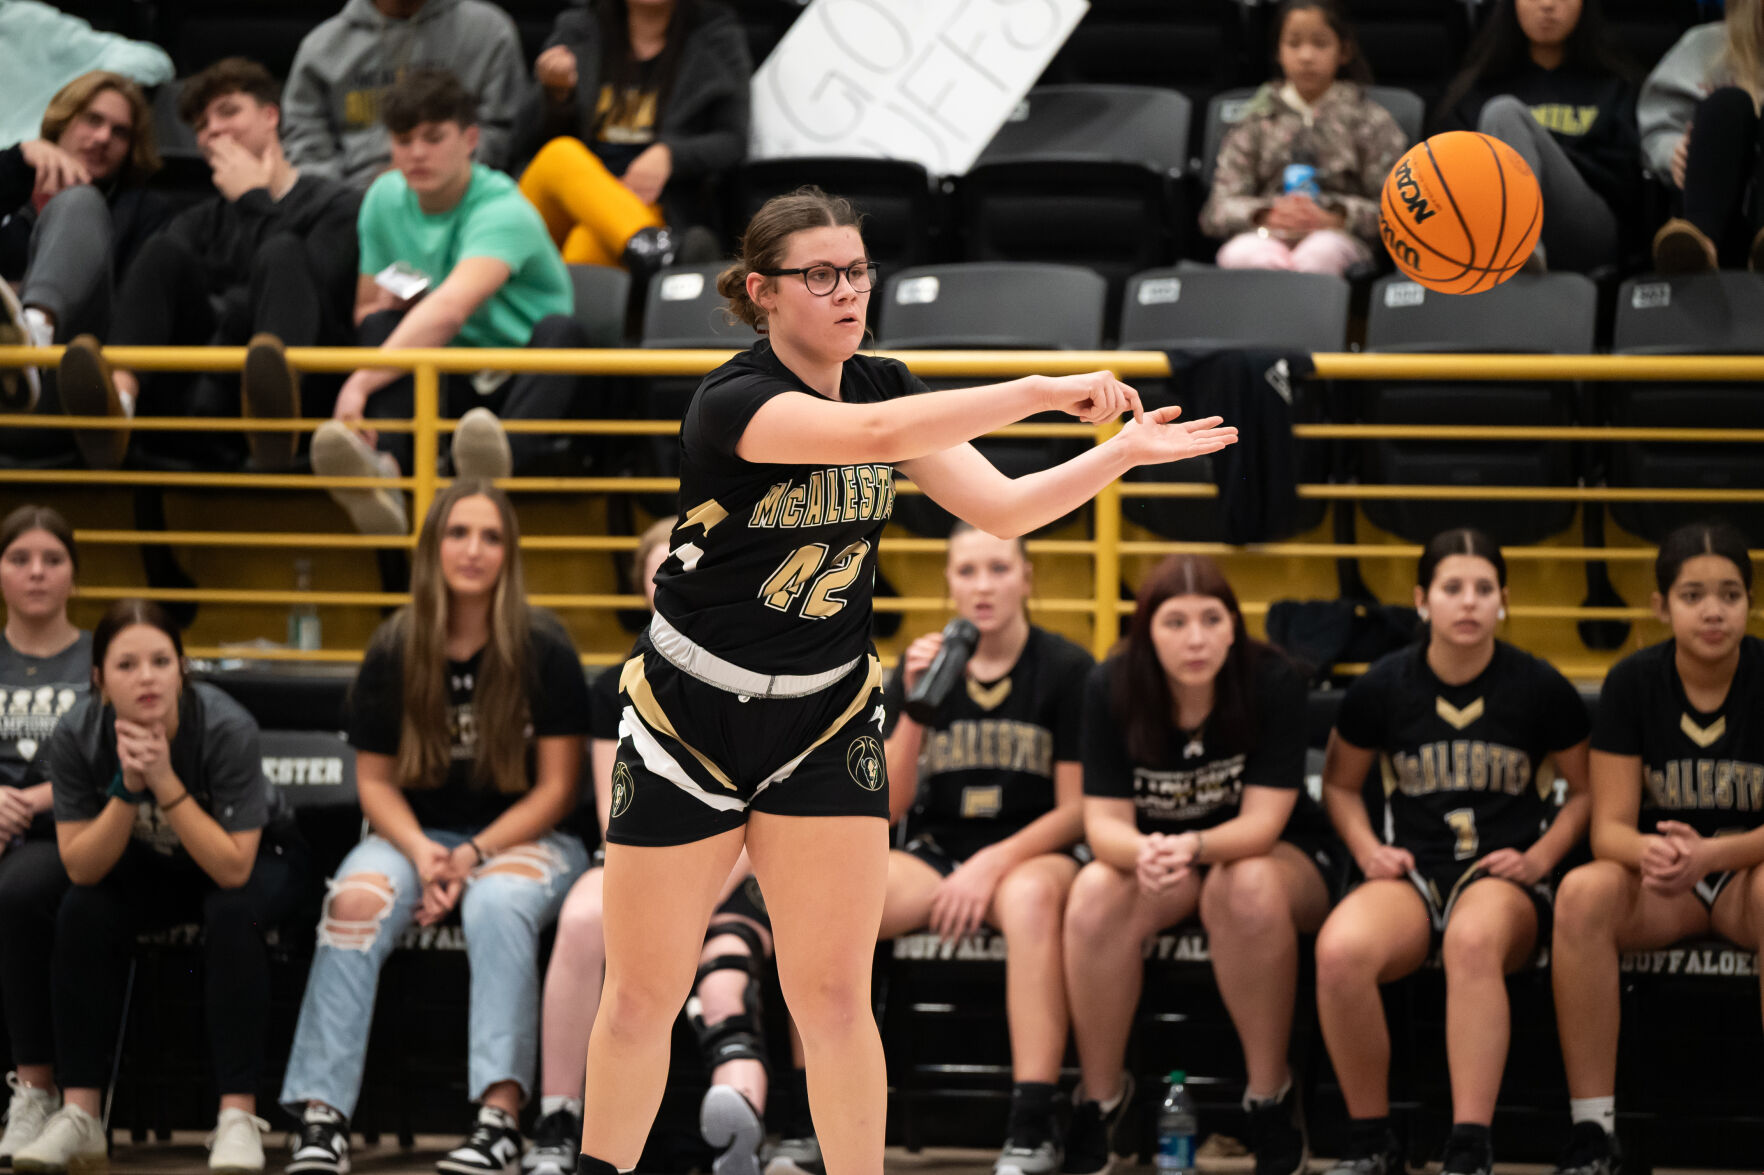 McAlester Lady Buffs Advance to Championship Game, Defeat Will Rogers 62-47